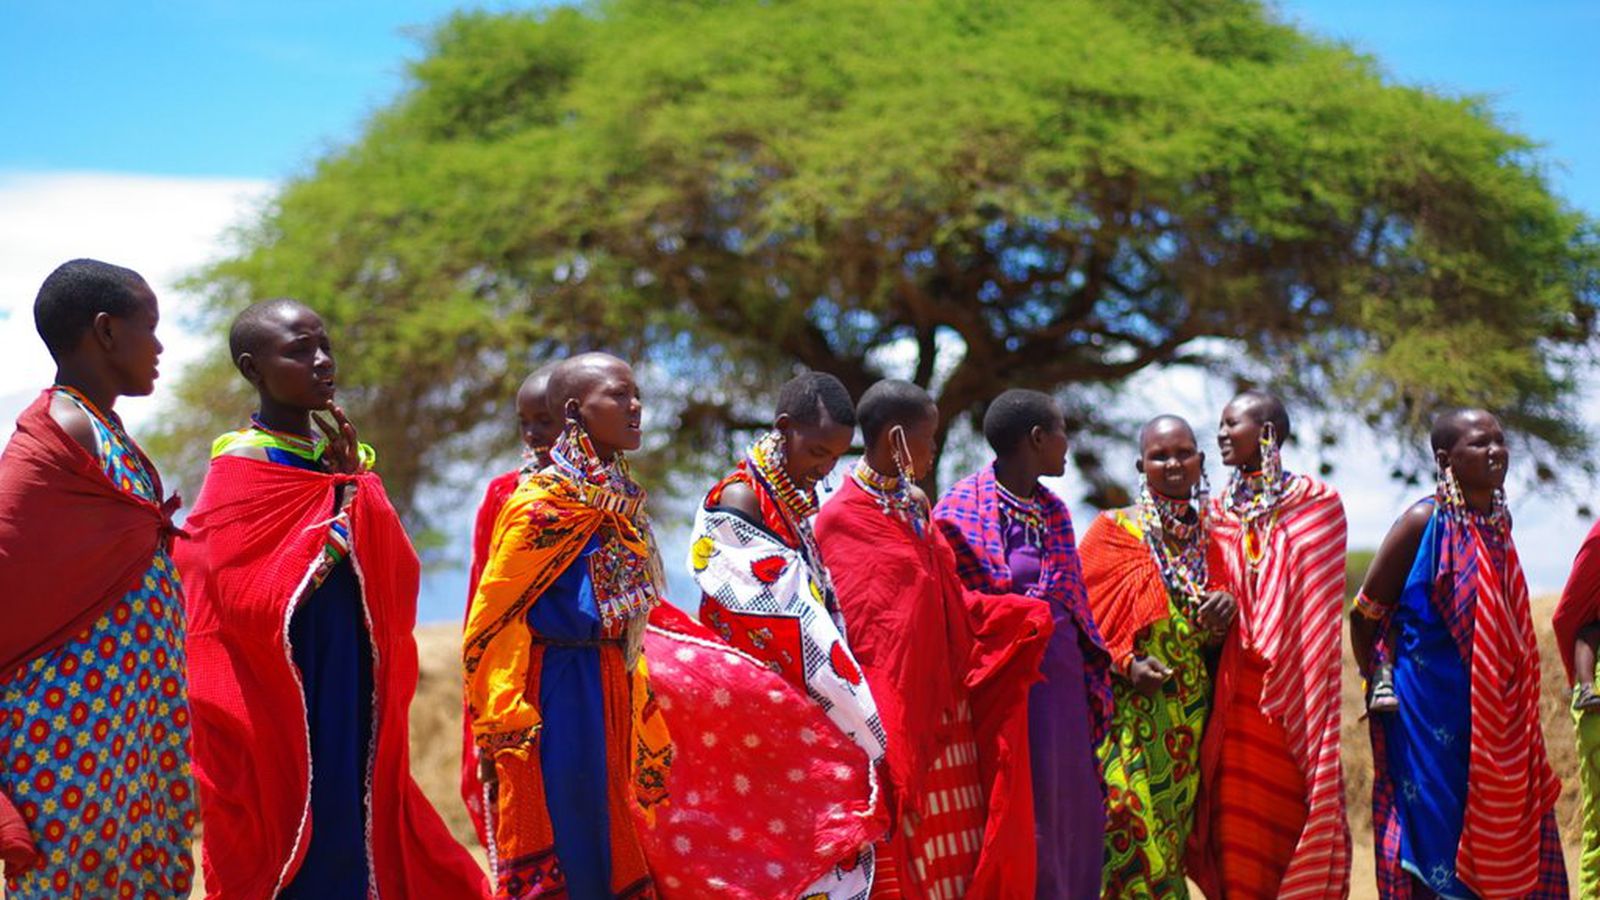 The famous Maasai tribe battles for legal rights to its name - The Verge